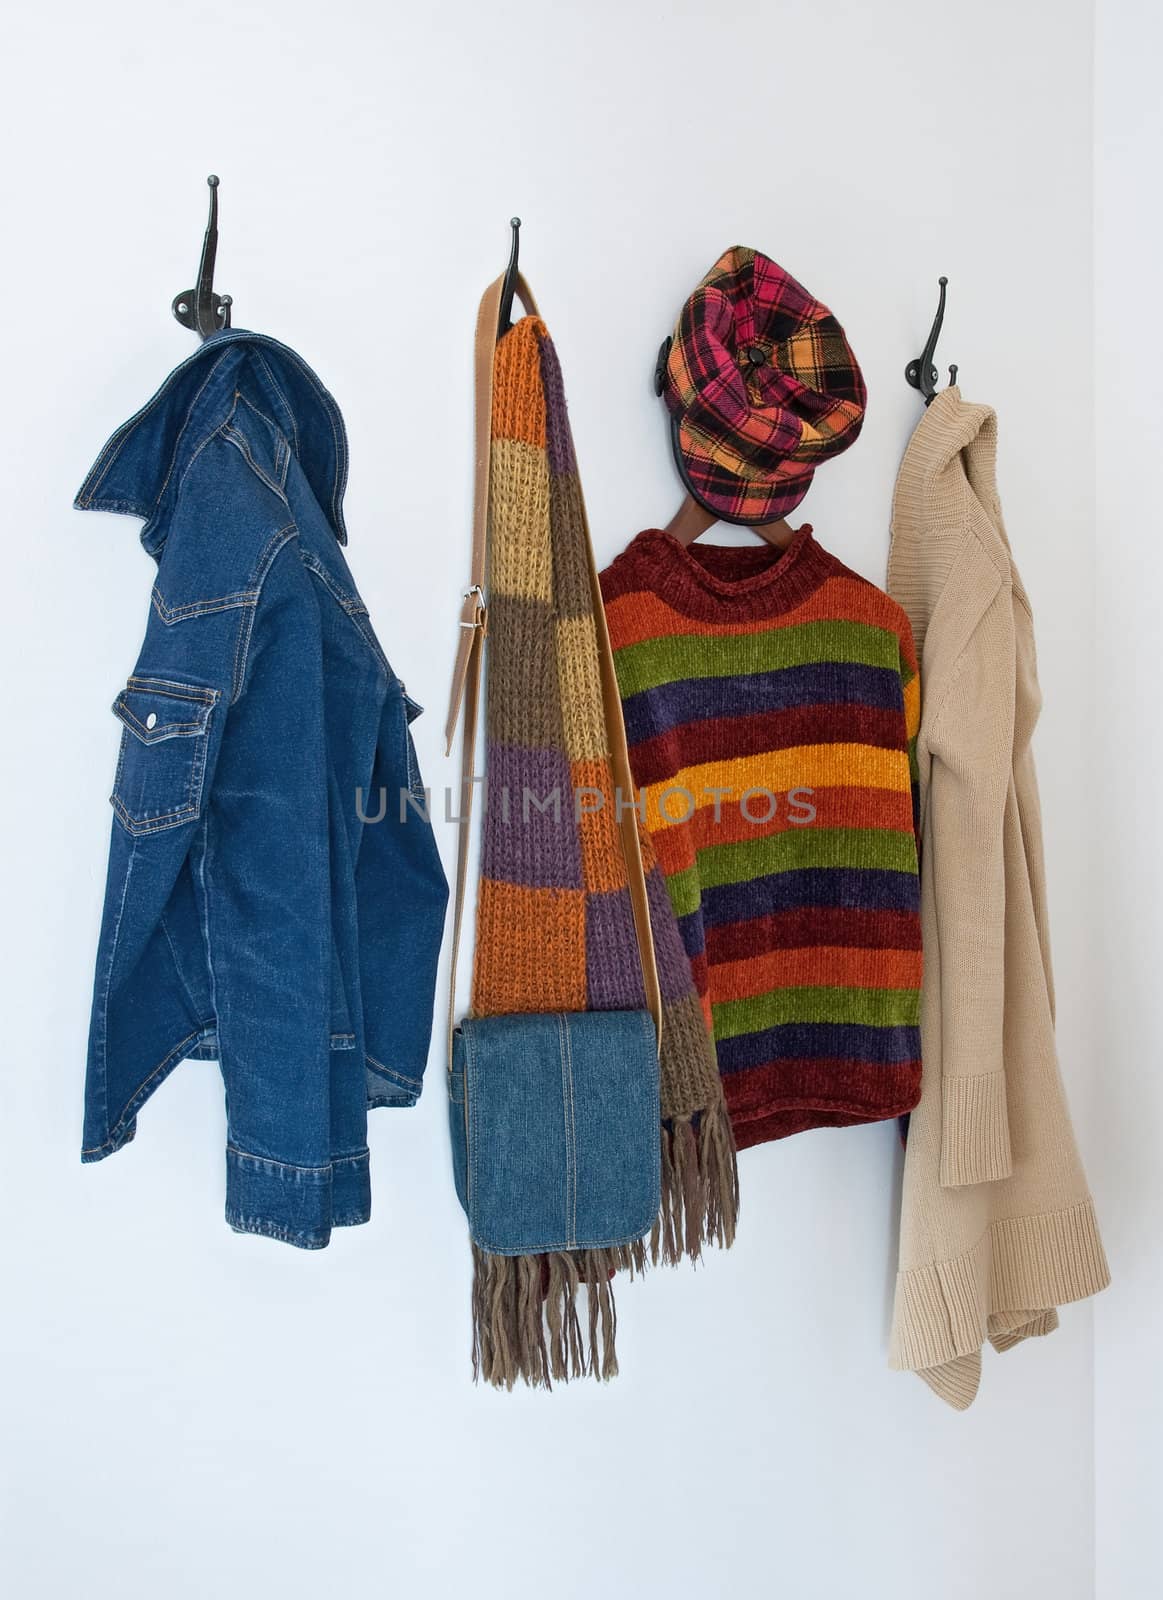 Colorful clothing and bag on metal coat hooks, on a white wall.